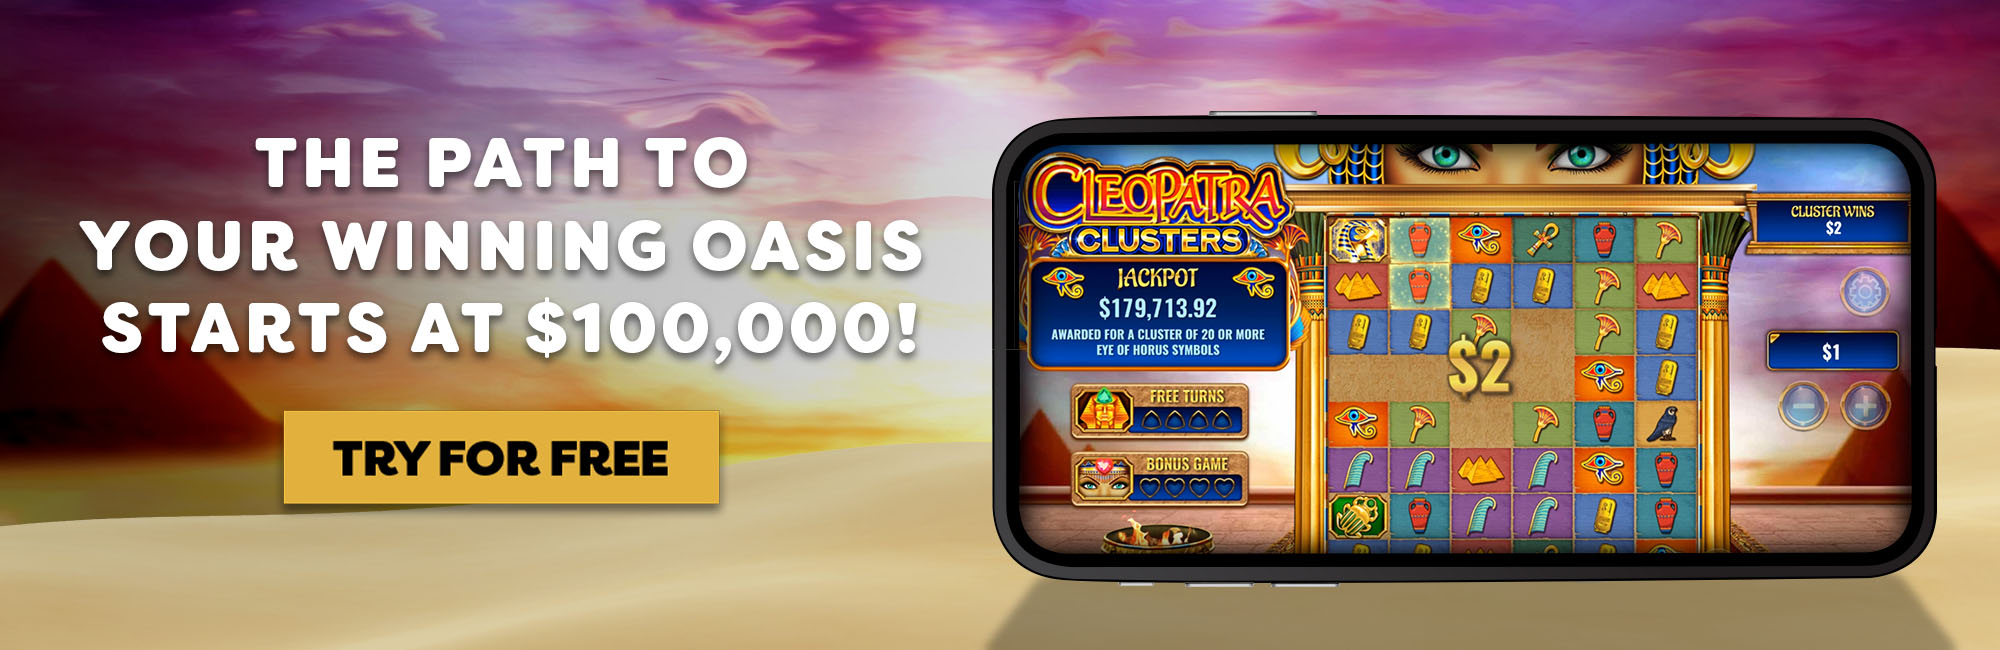 Play Cleopatra Clusters!